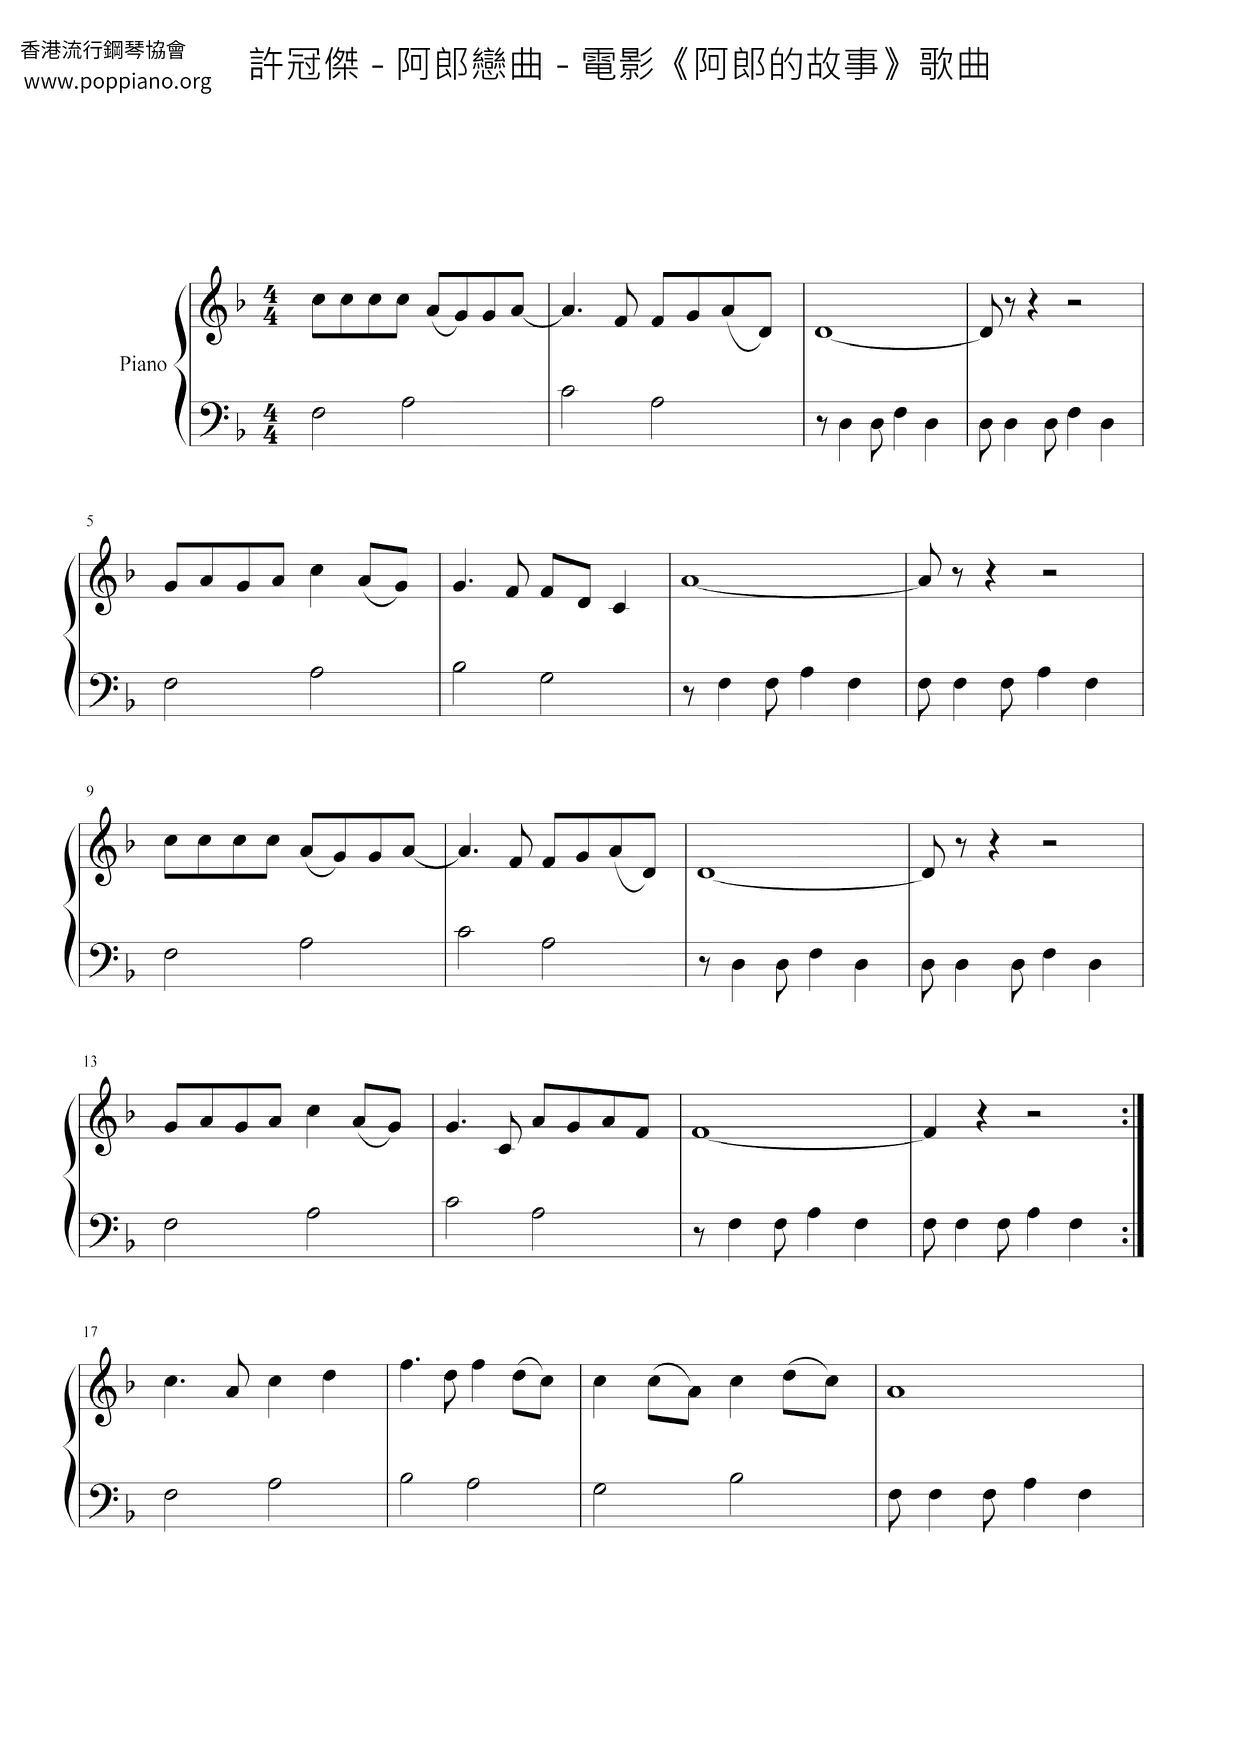 A Lang's Love Song - Song Of The Movie "A Lang's Story" Score